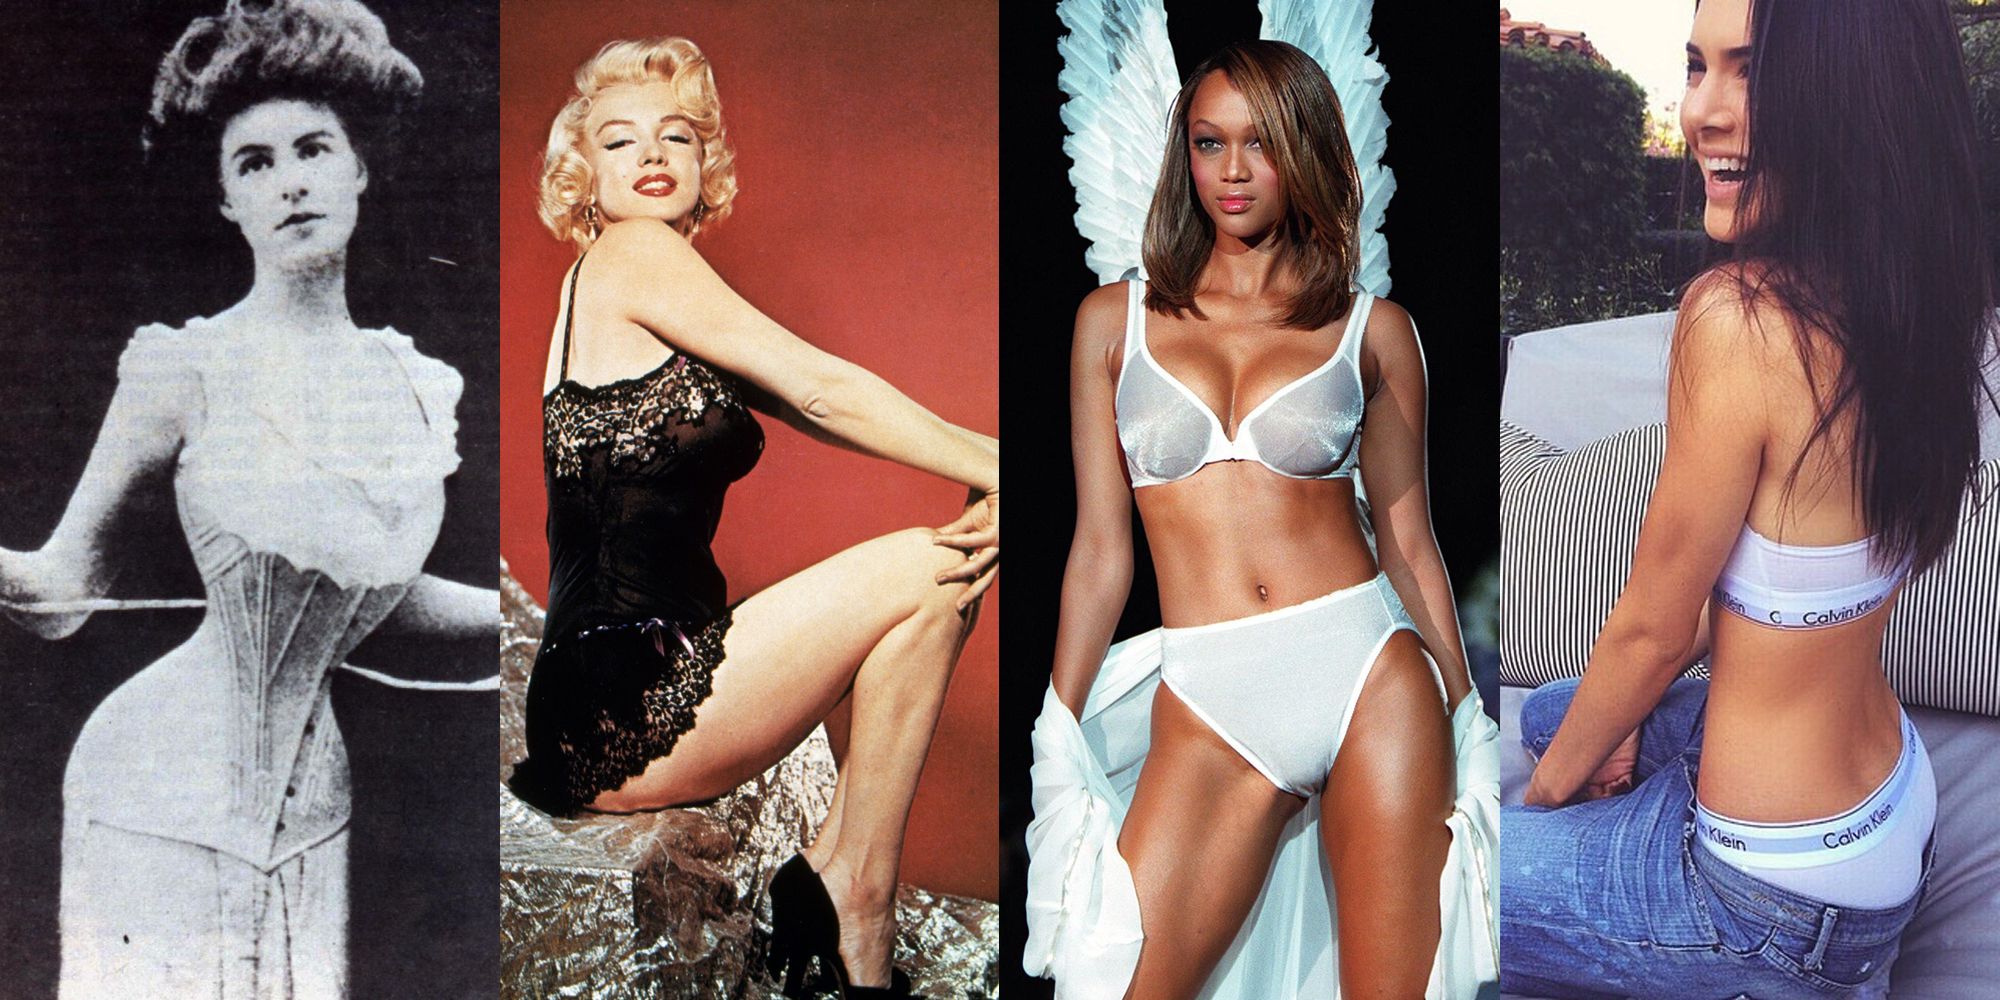 The Evolution of Lingerie - Lingerie and Underwear Trends Through